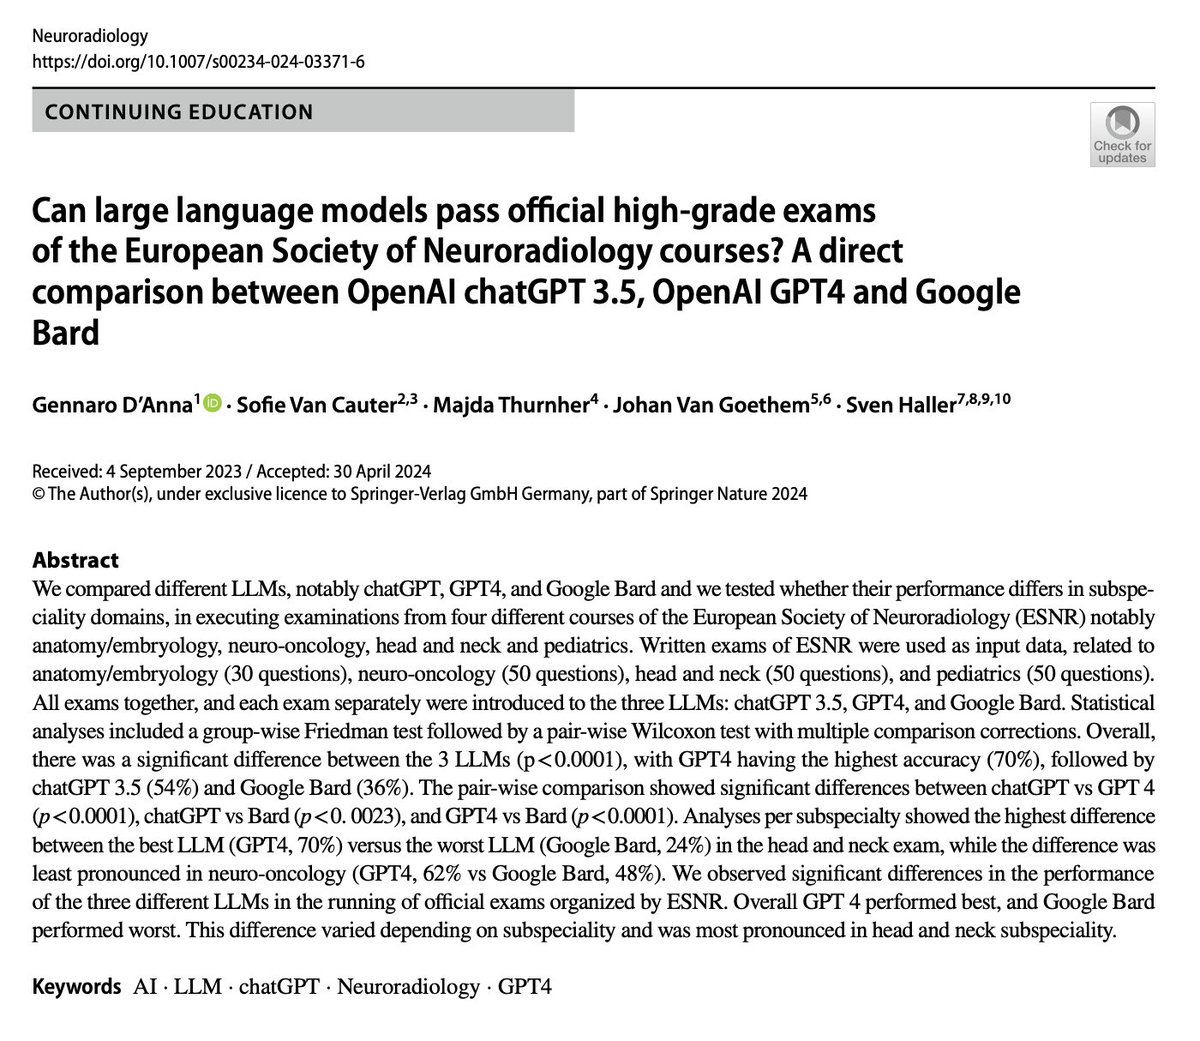 Just published a paper on the Evaluation of Three #LLMs (#chatGPT,#GPT4, and @Google #Bard) with real examinations from @ESNRad high-grade courses, #ECNR (2),#ECPNR, and #ECHNR. @NRADjournal #AI #LLM #Neuroradiology #examinations #radiology #Neurorad